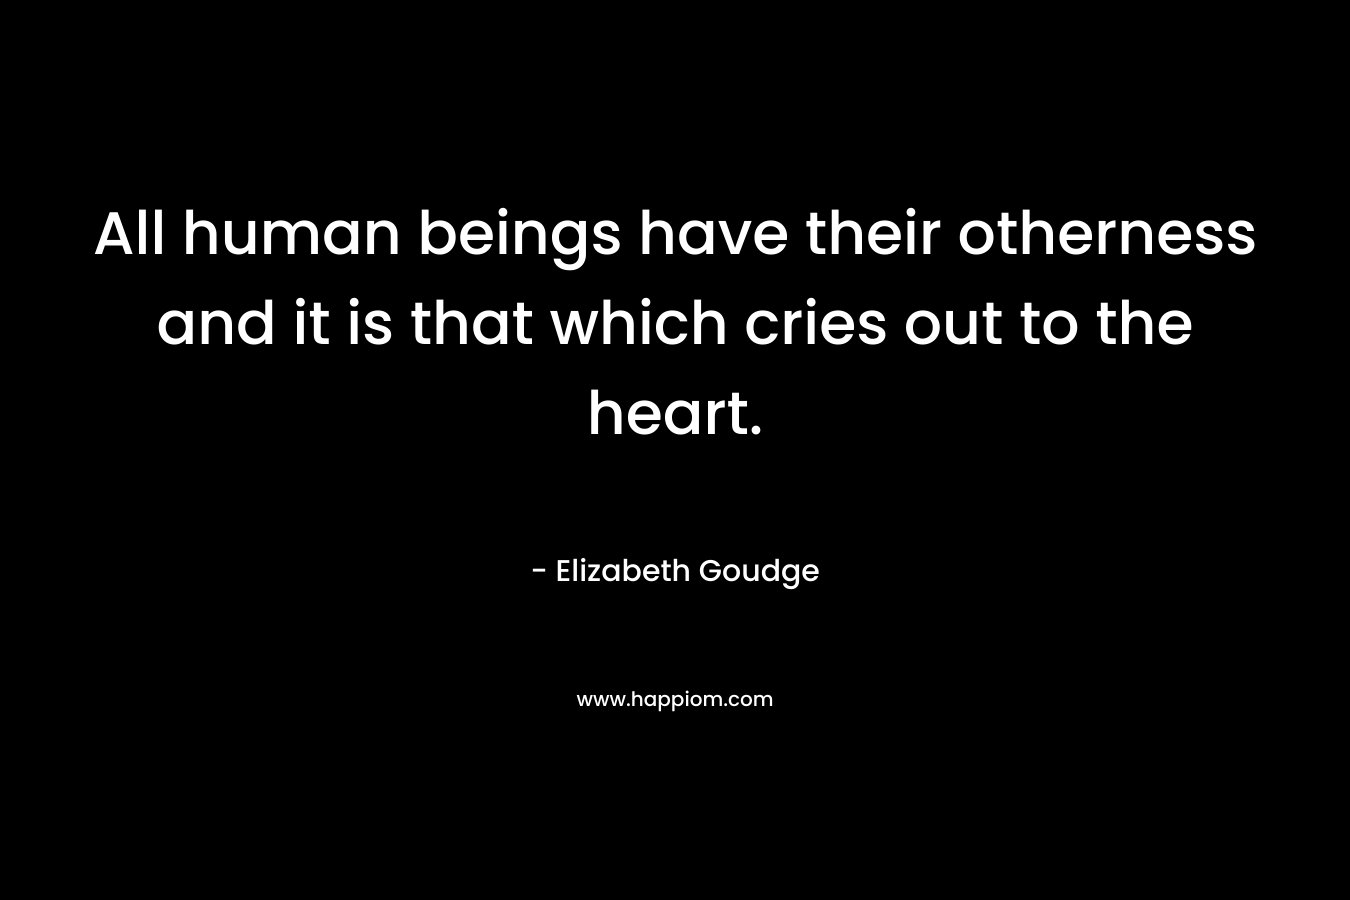 All human beings have their otherness and it is that which cries out to the heart. – Elizabeth Goudge